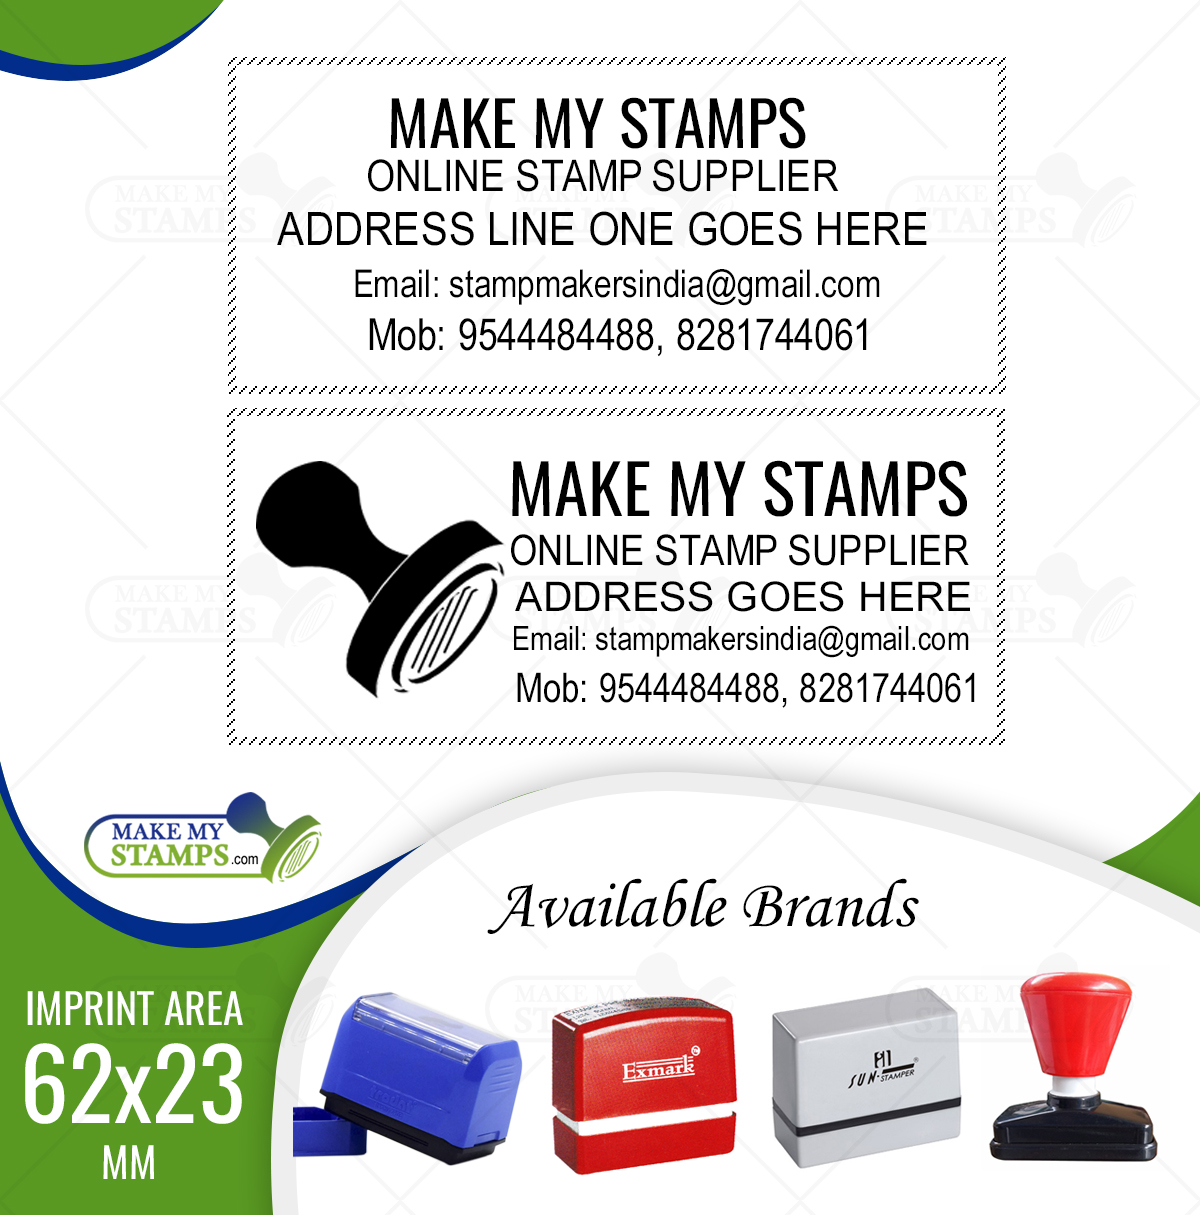 Create a business stamp, business stamps design, company stamp